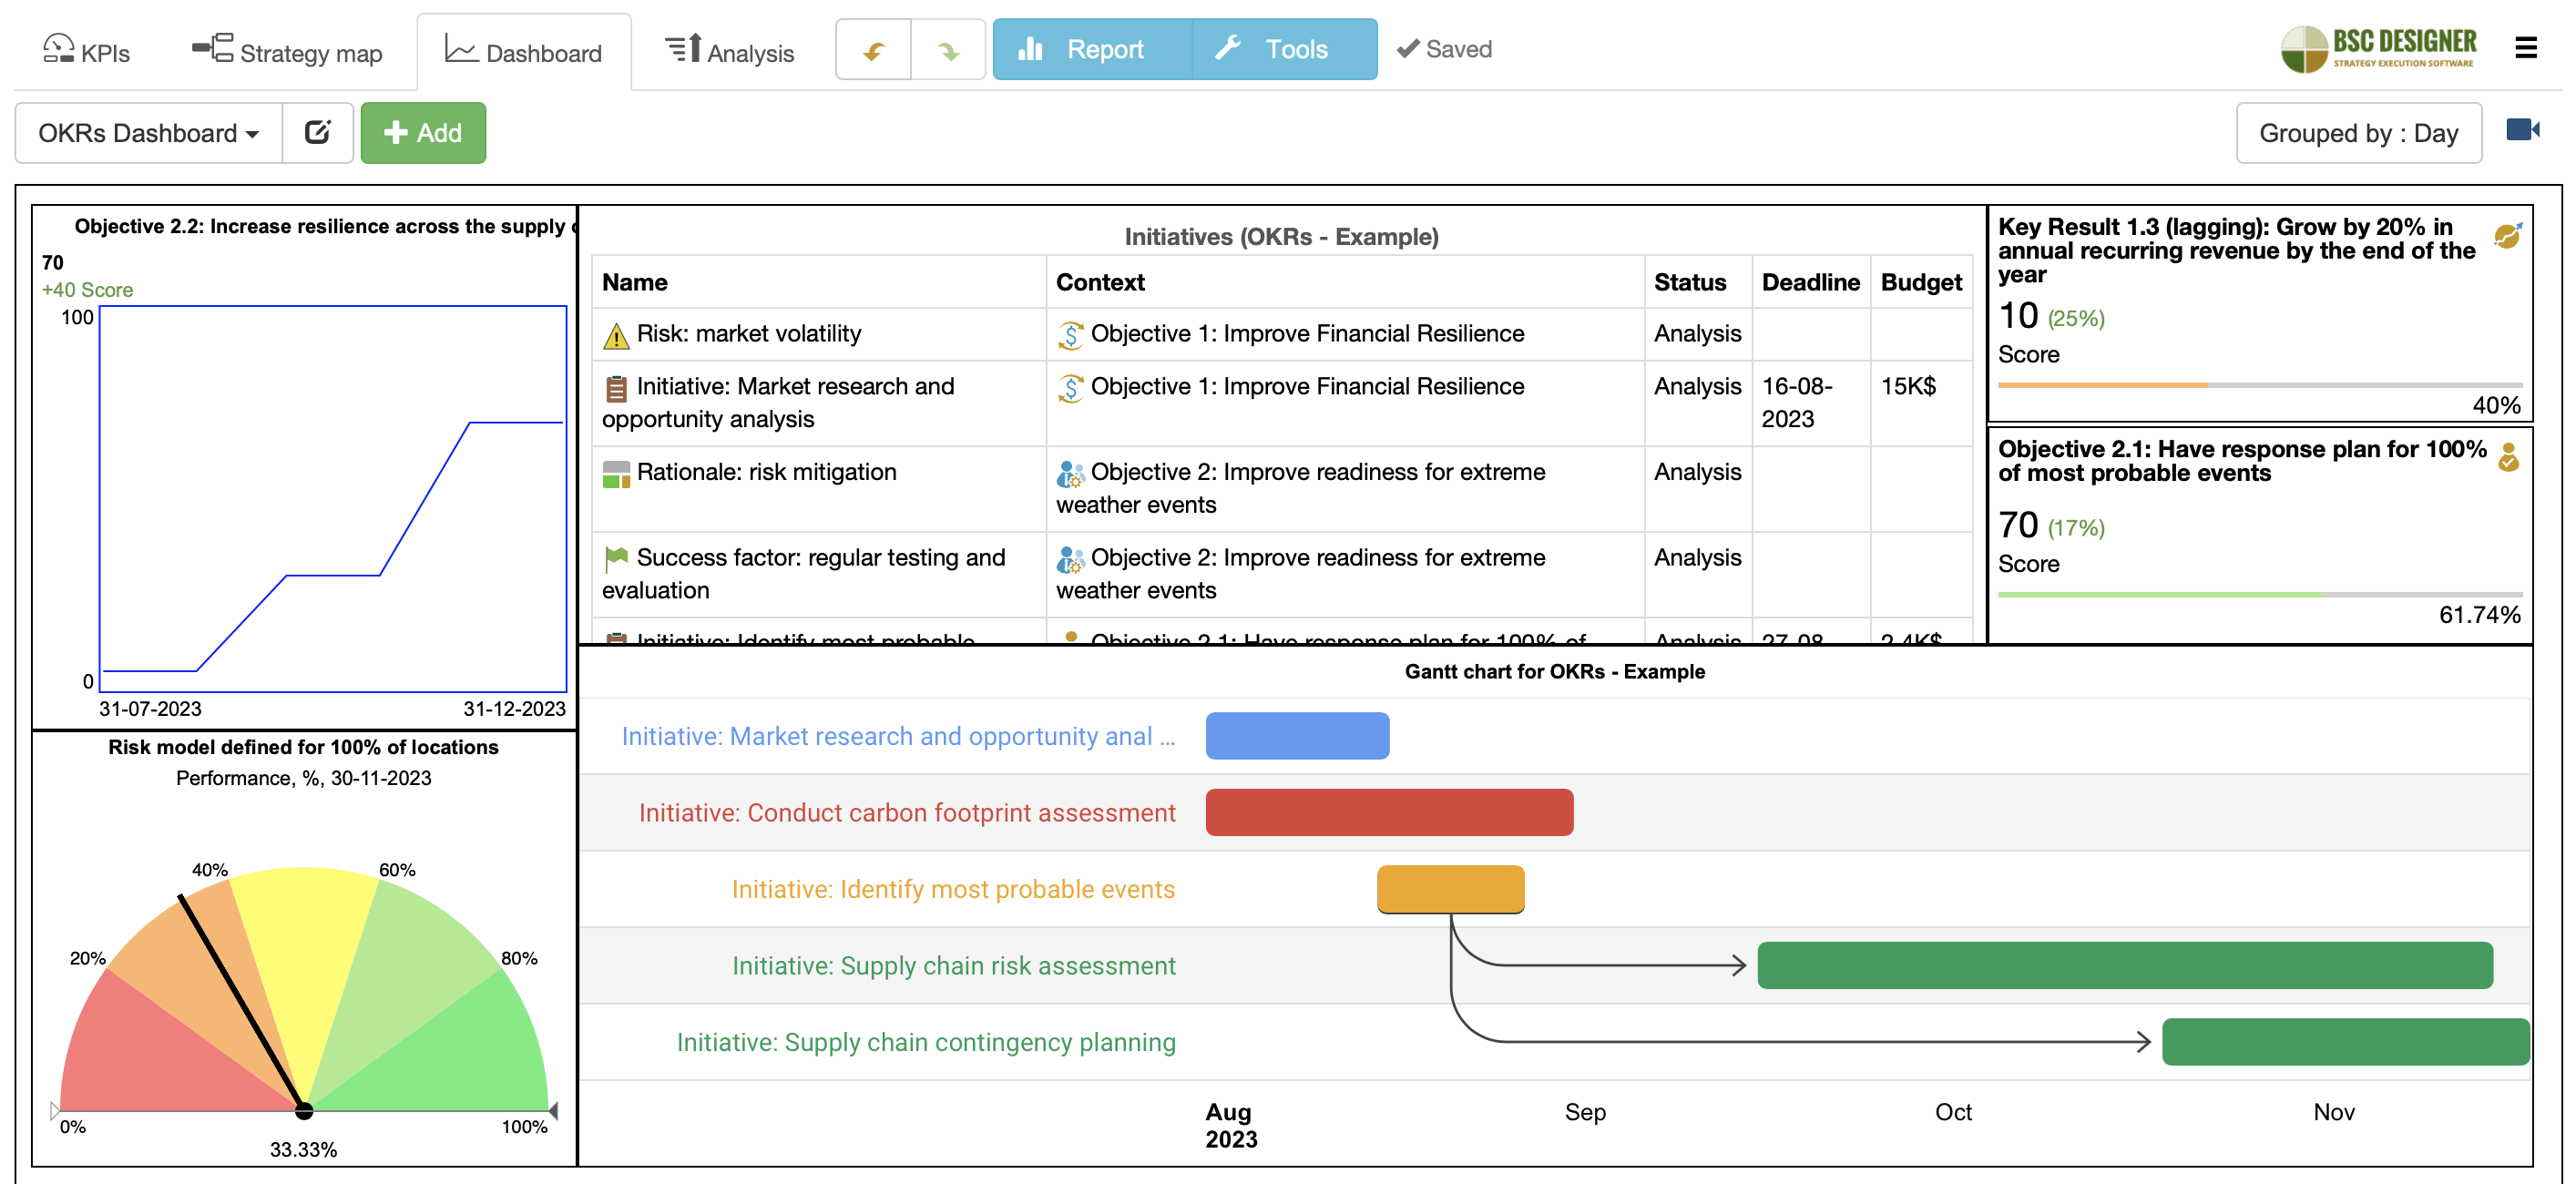 A dashboard visualizes Key Results and Initiatives.